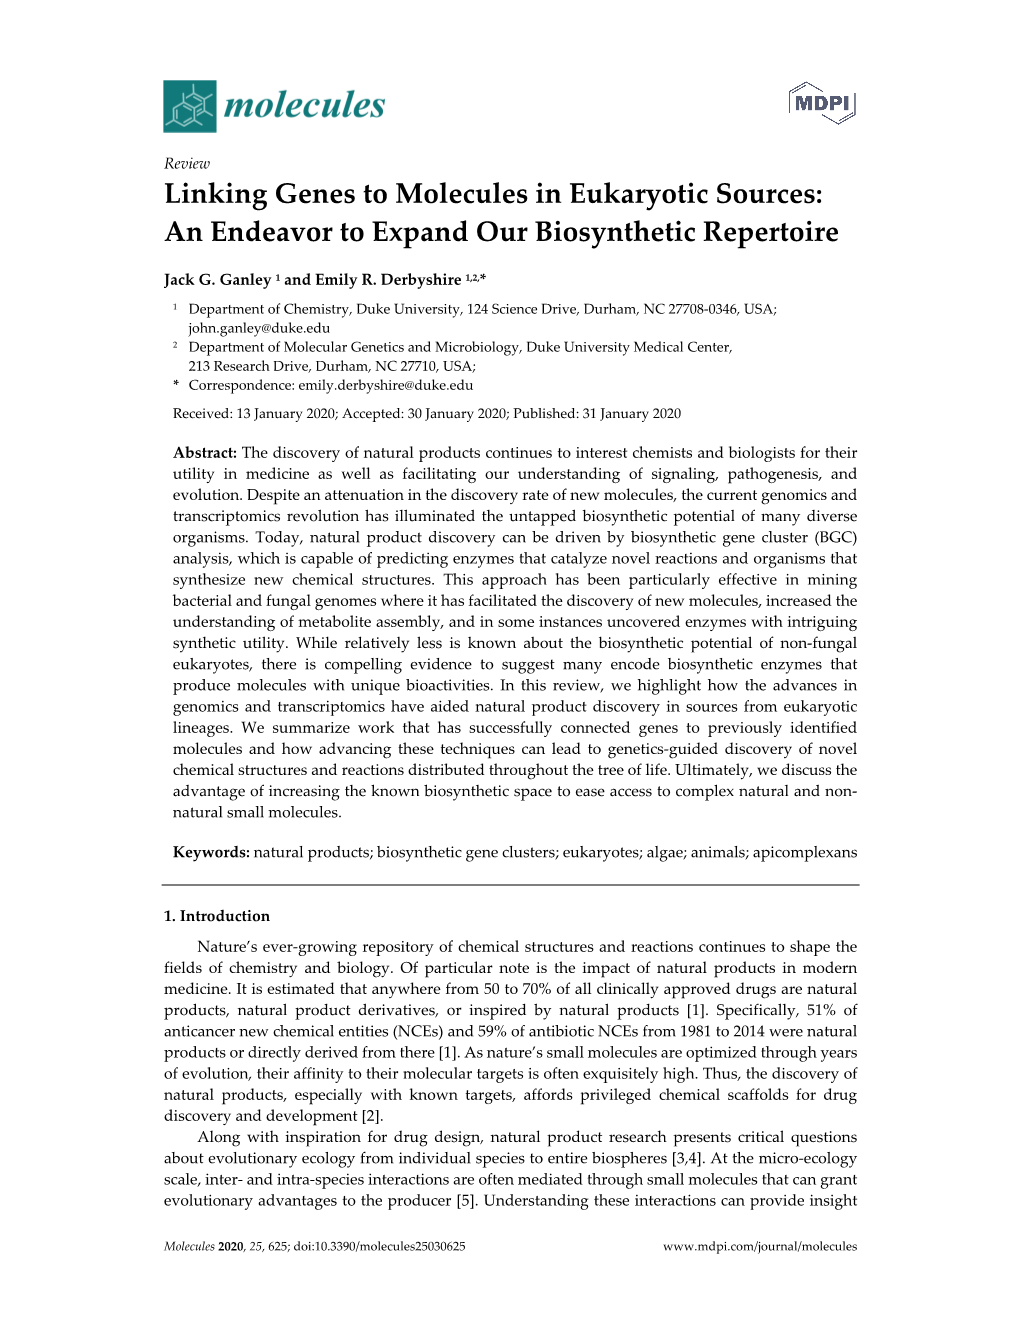 Linking Genes to Molecules in Eukaryotic Sources: an Endeavor to Expand Our Biosynthetic Repertoire